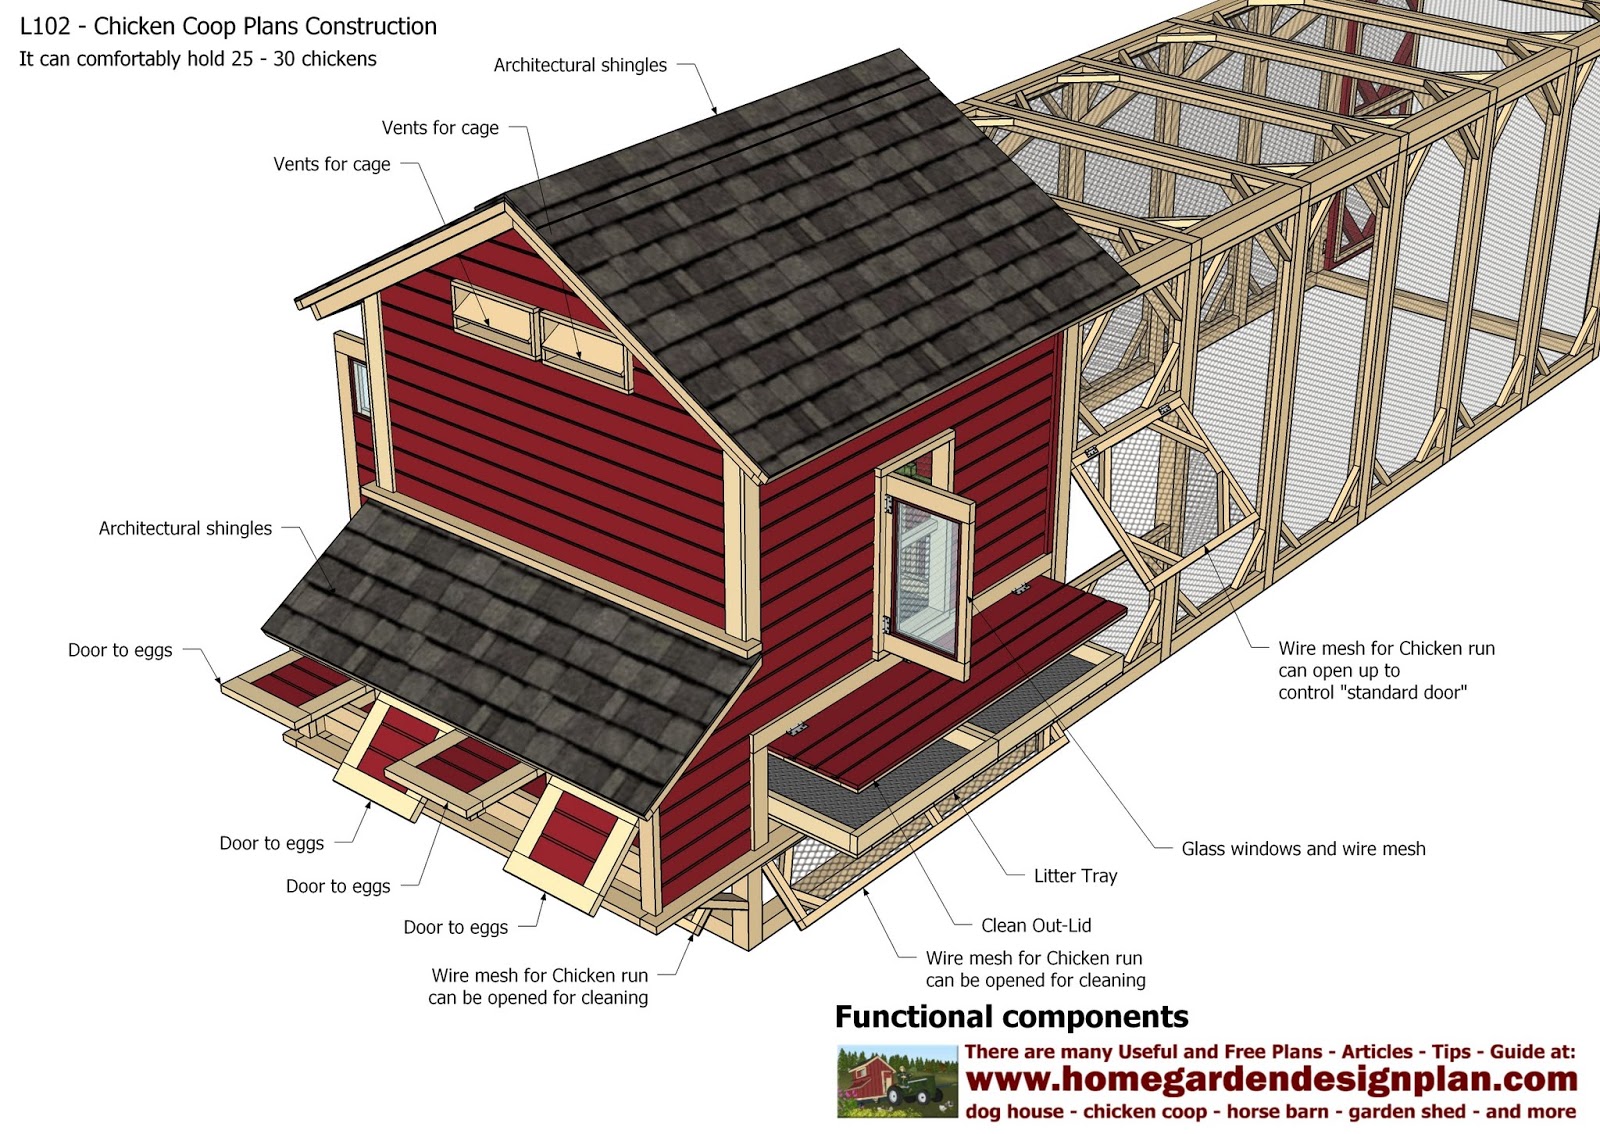 l102-chicken-coop-plans-construction-chicken-coop-design-how-to-build-a